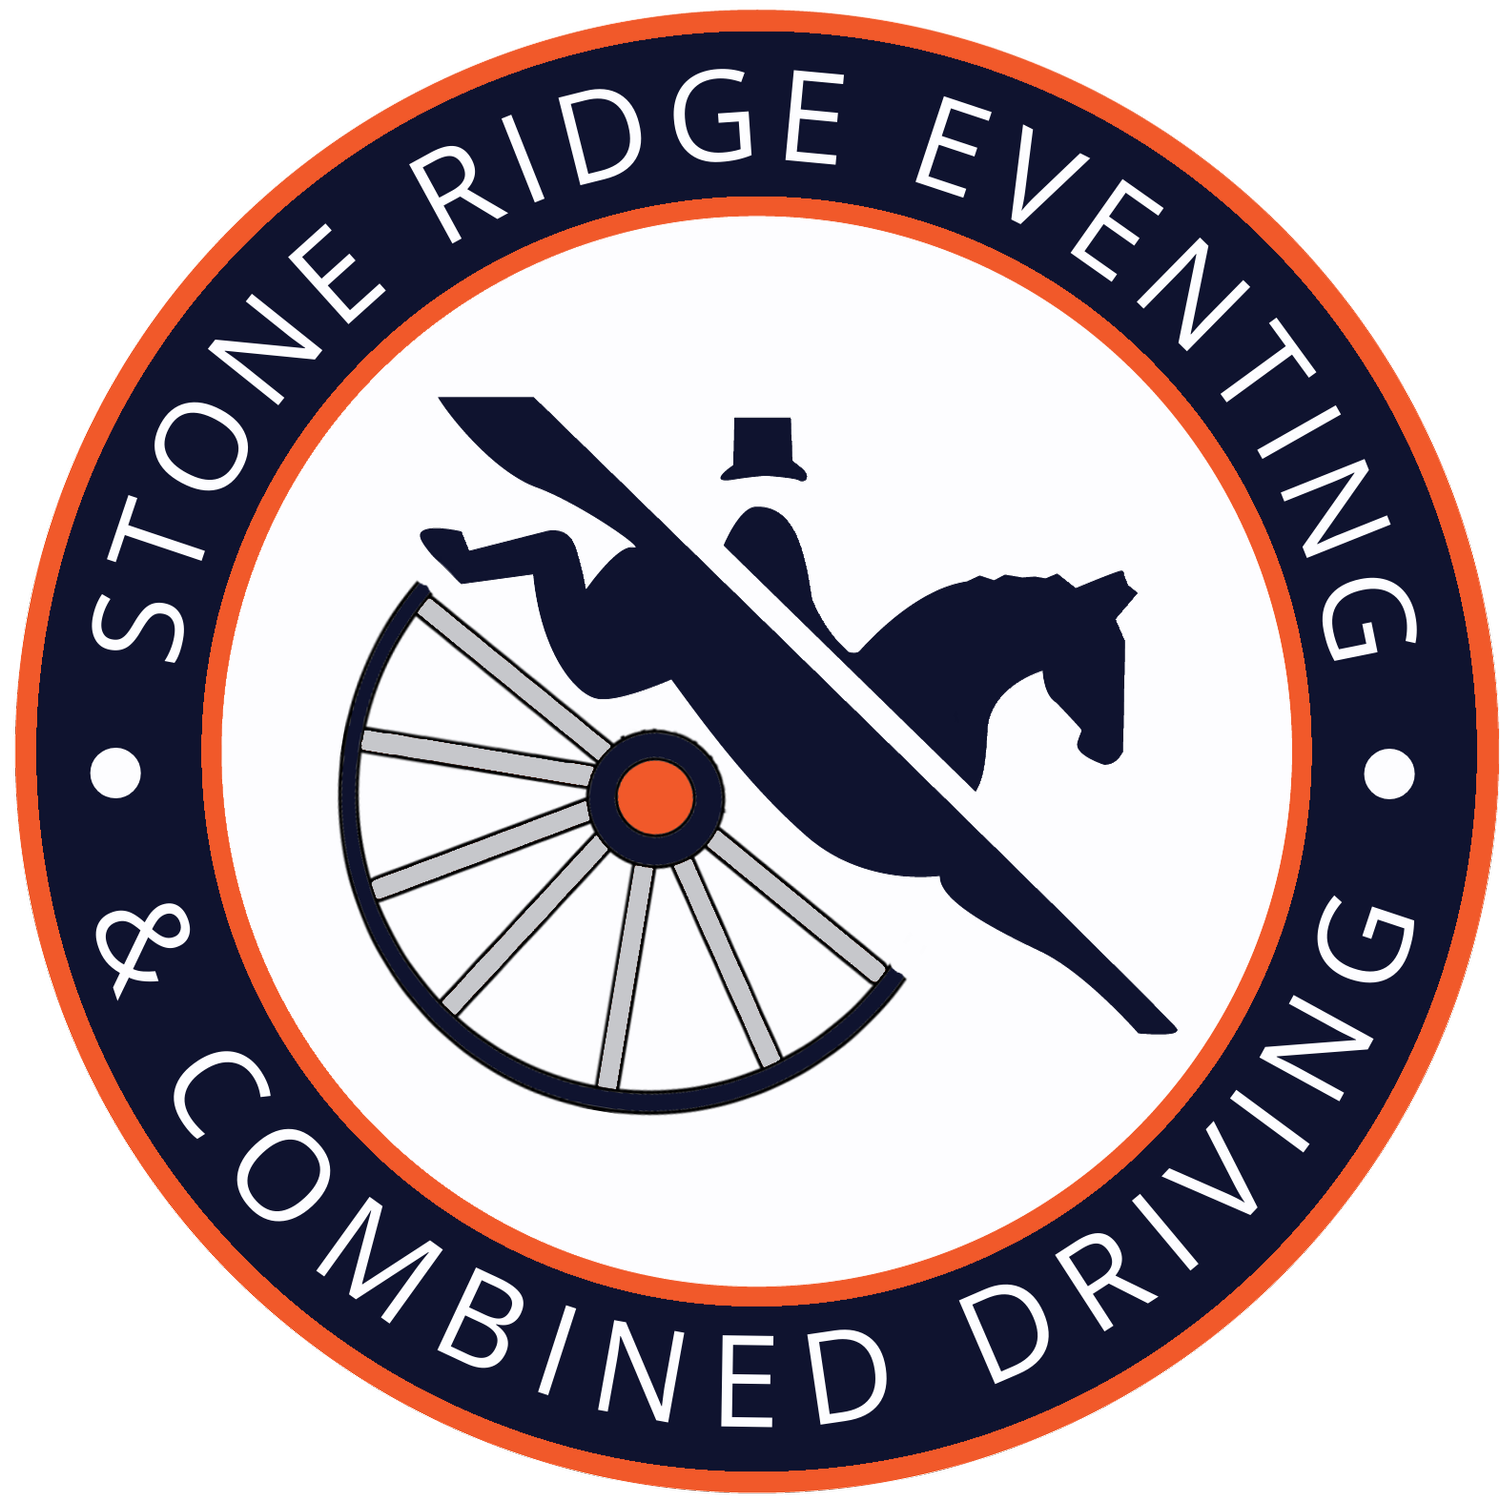 STONE RIDGE EVENTING &amp; COMBINED DRIVING